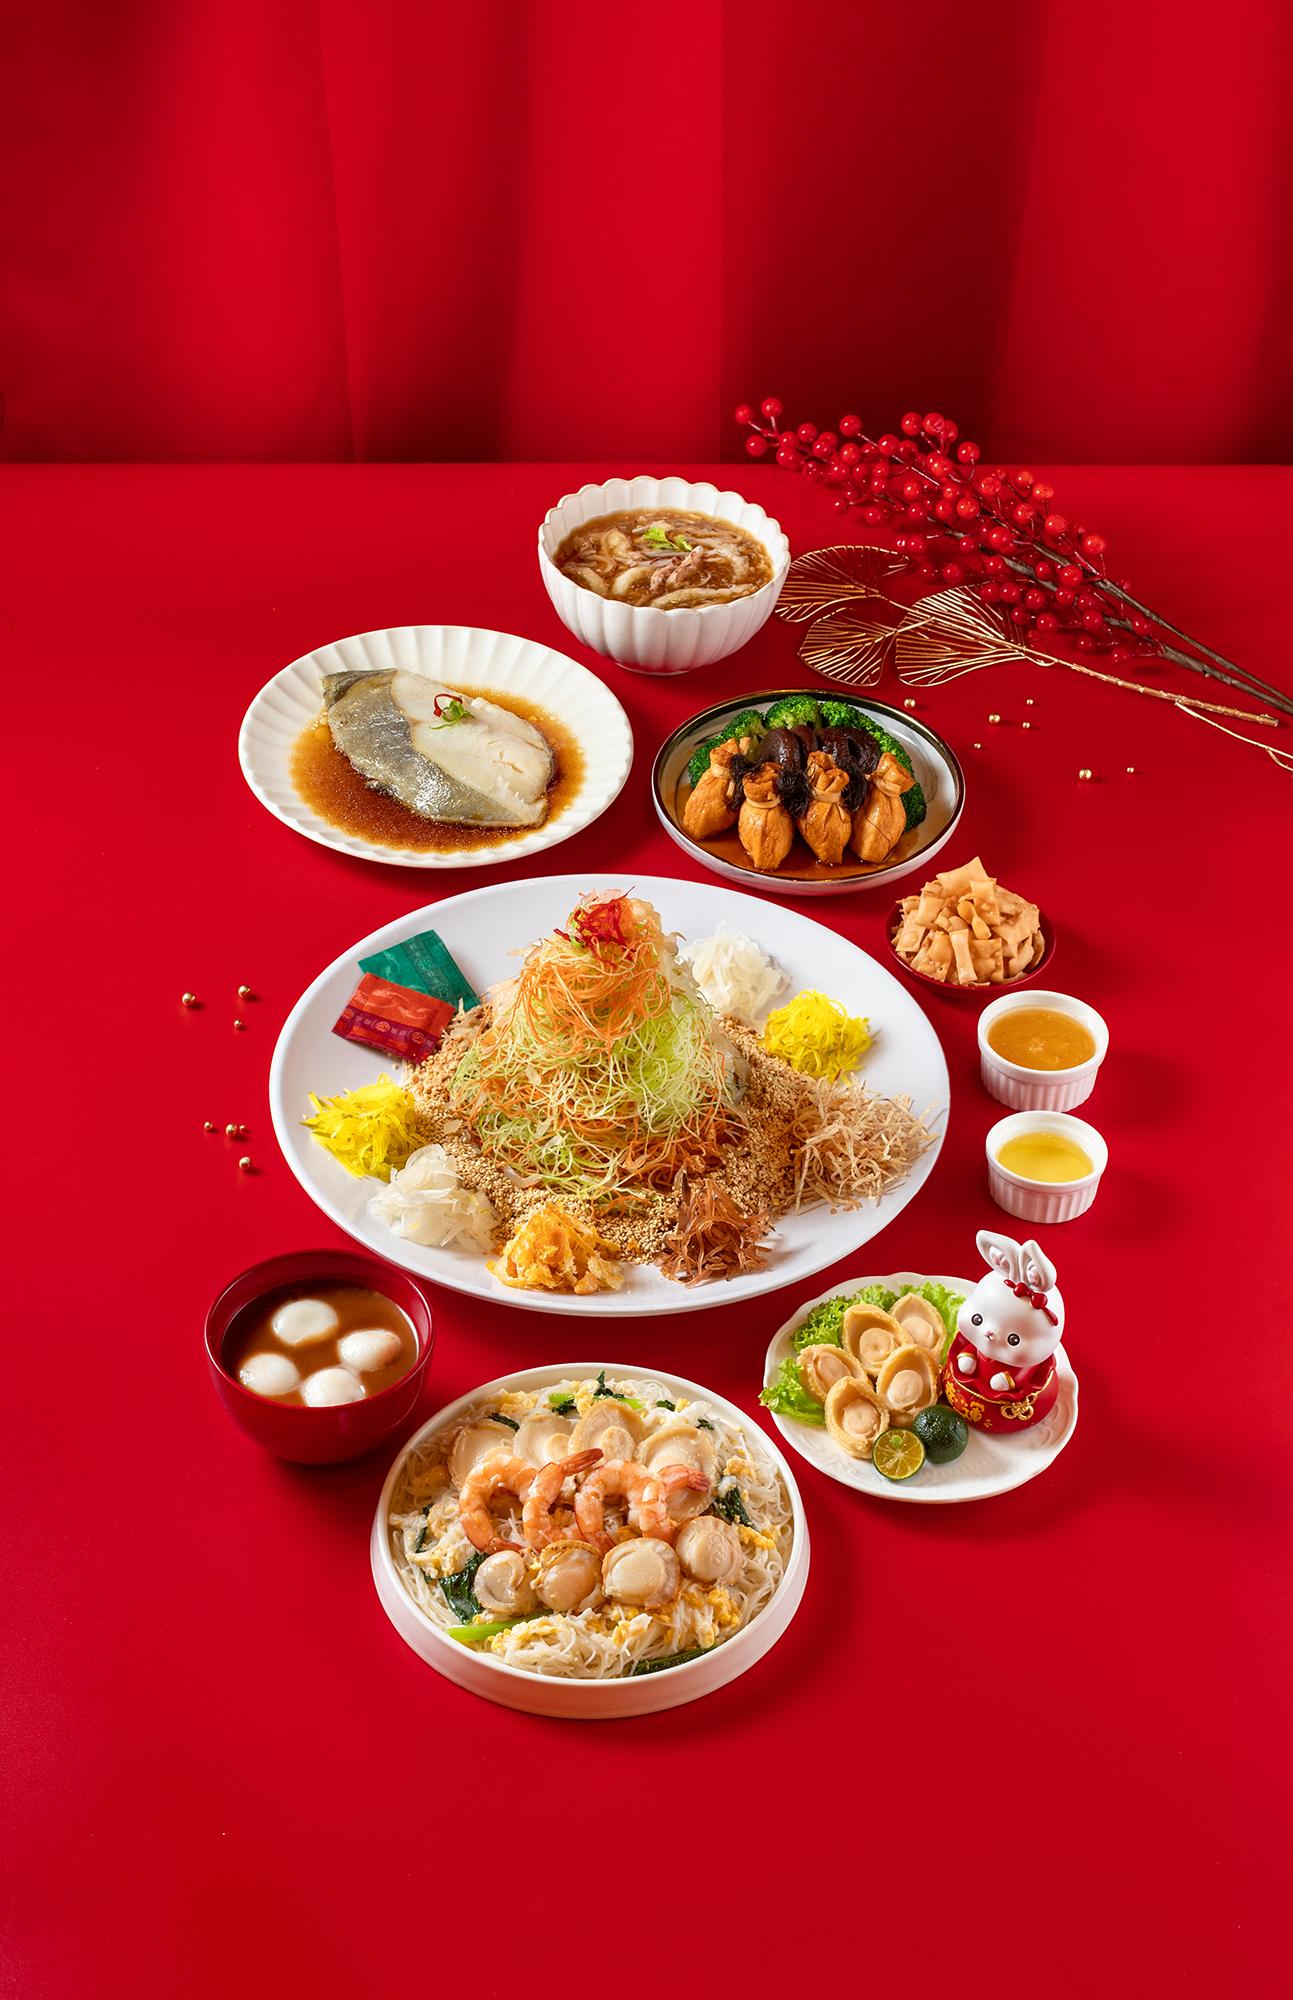 Lobang: MORE THAN 50 CNY 2023 F&B Deals - Your one stop guide to Yusheng, Pen Cai, Set Menus and more this Lunar New Year! - 17